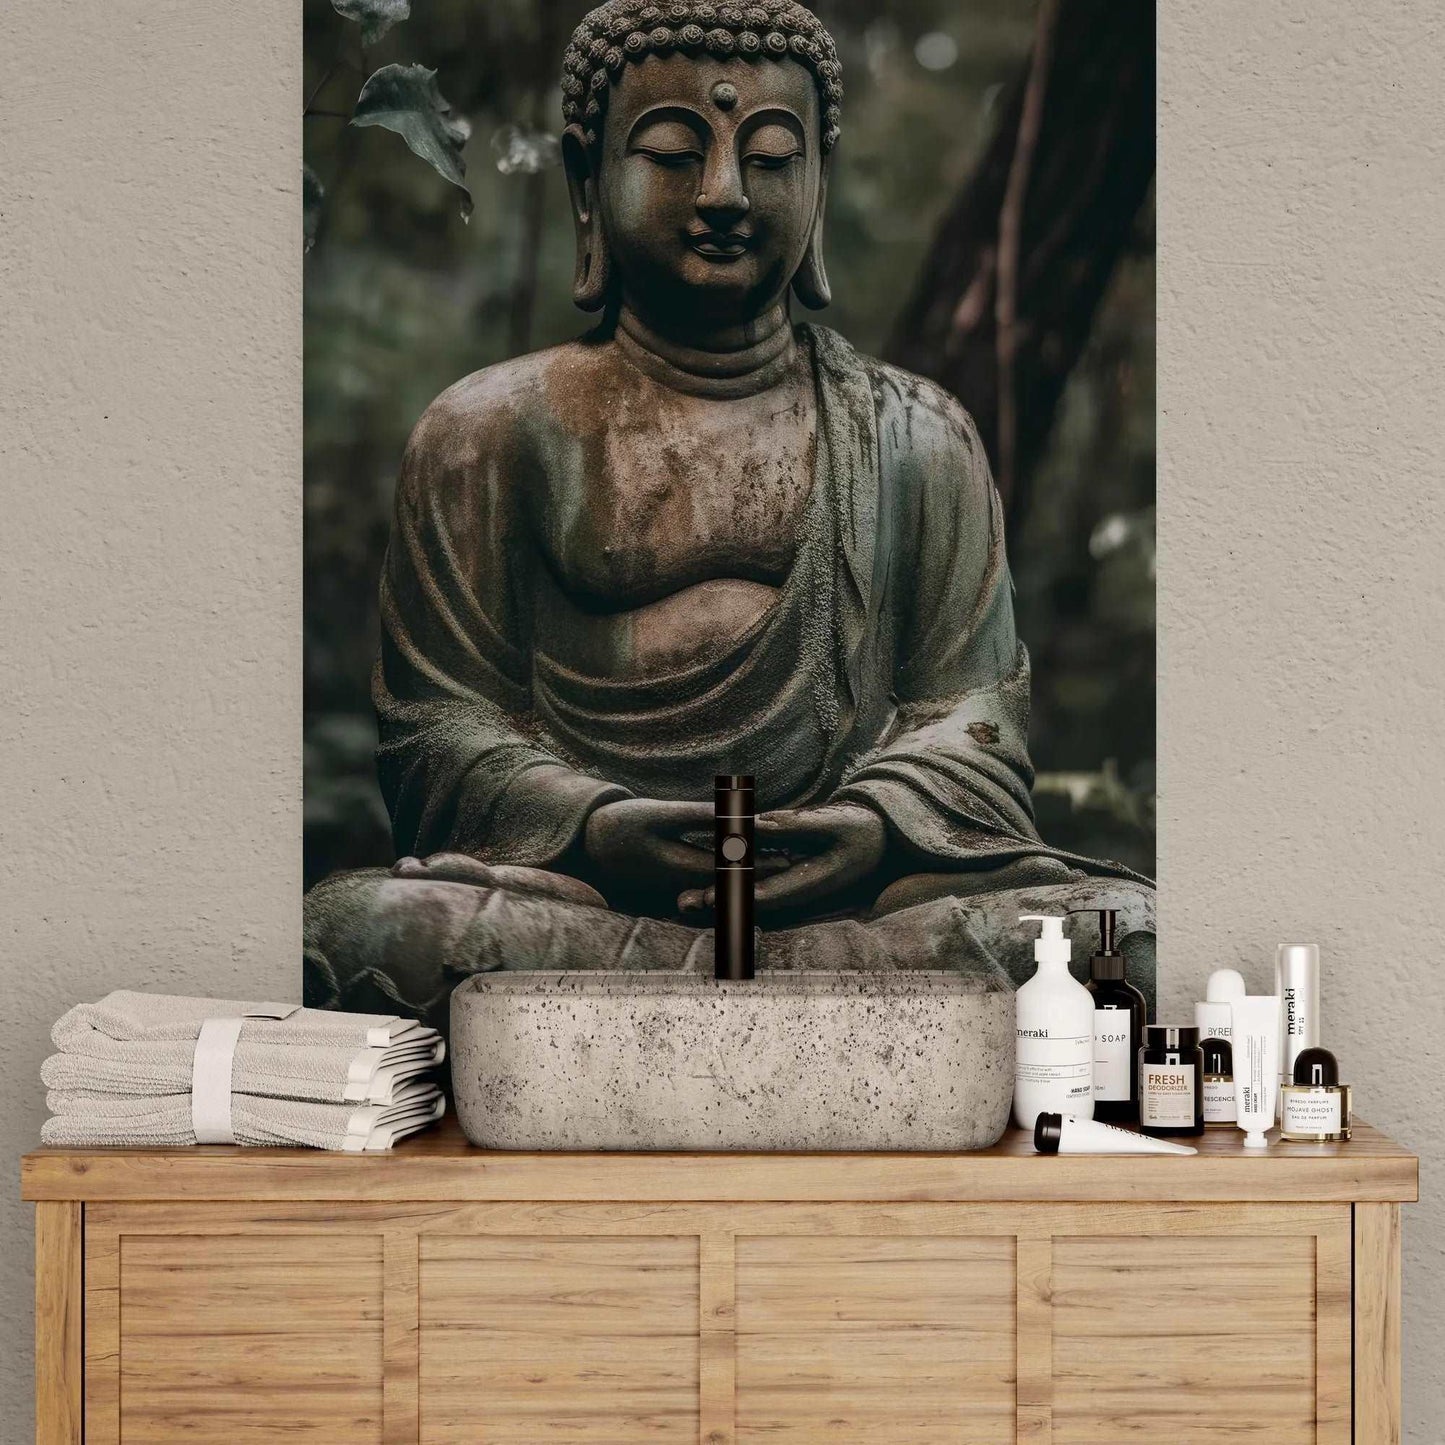 A meditative Buddha poster from ZenArtBliss.com, blending traditional Buddhist art styles with modern aesthetics, in muted greens and browns on matte paper.